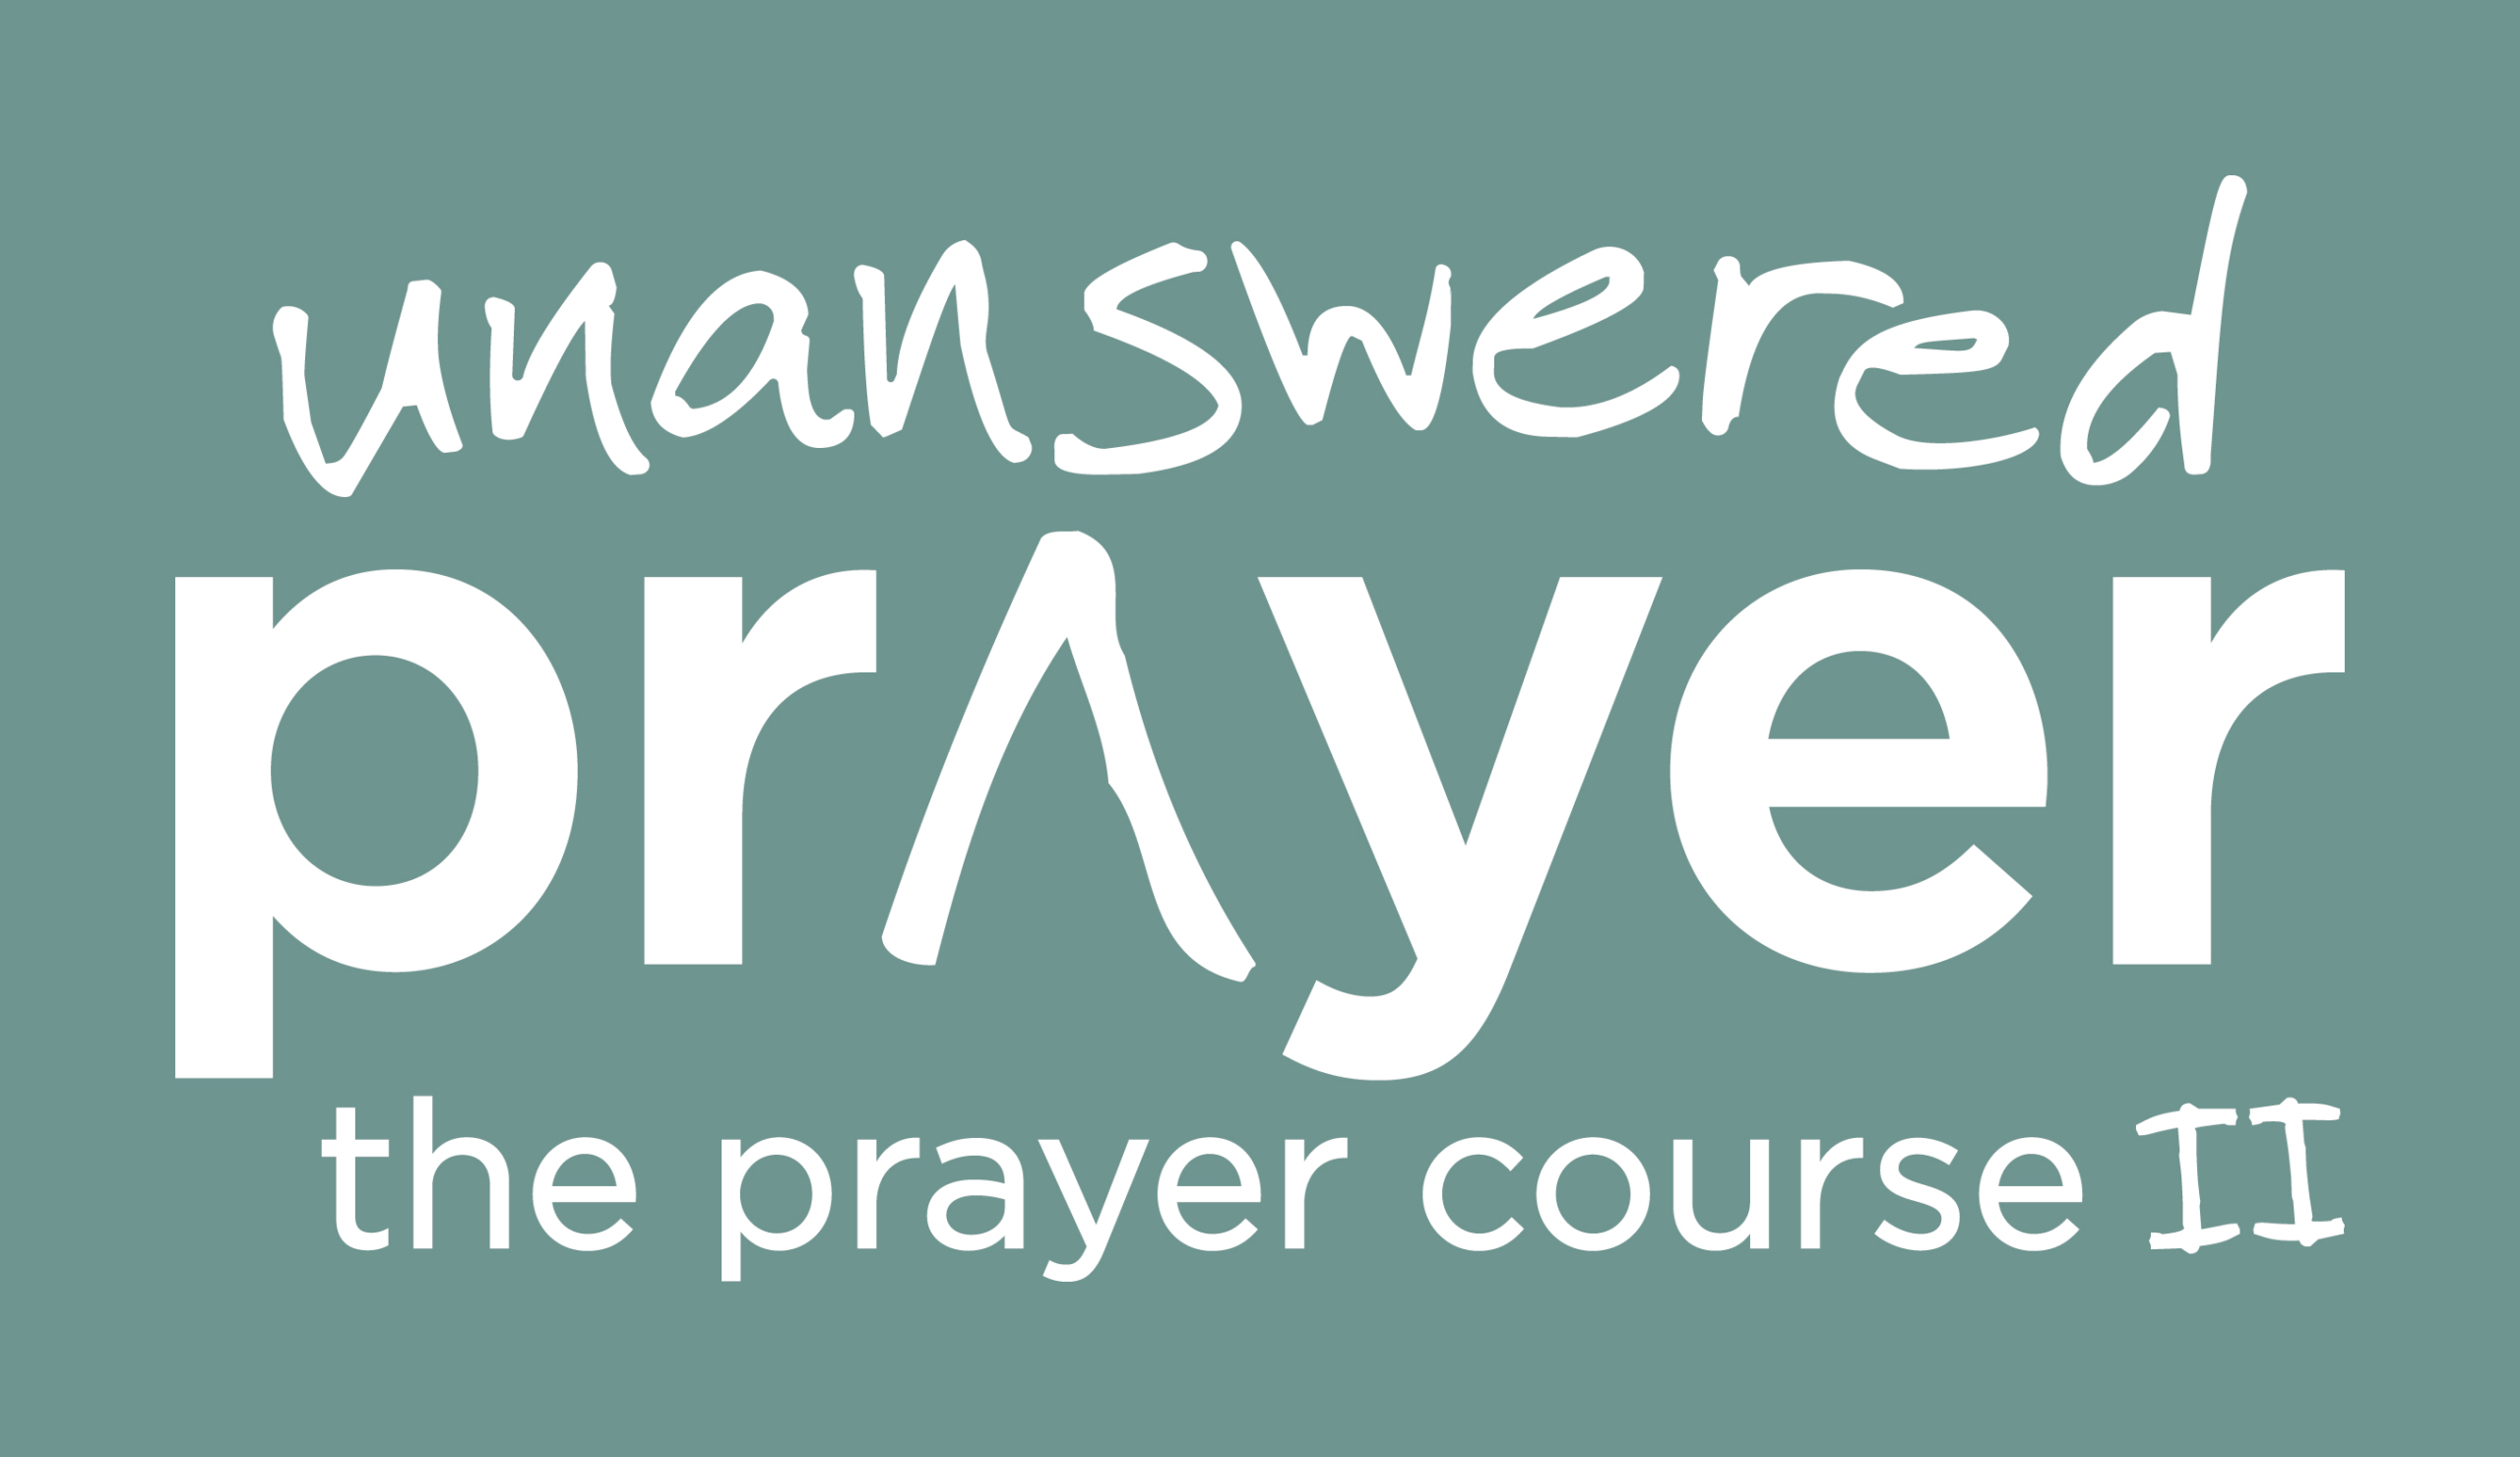 Event image for: The Unanswered Prayer Course II